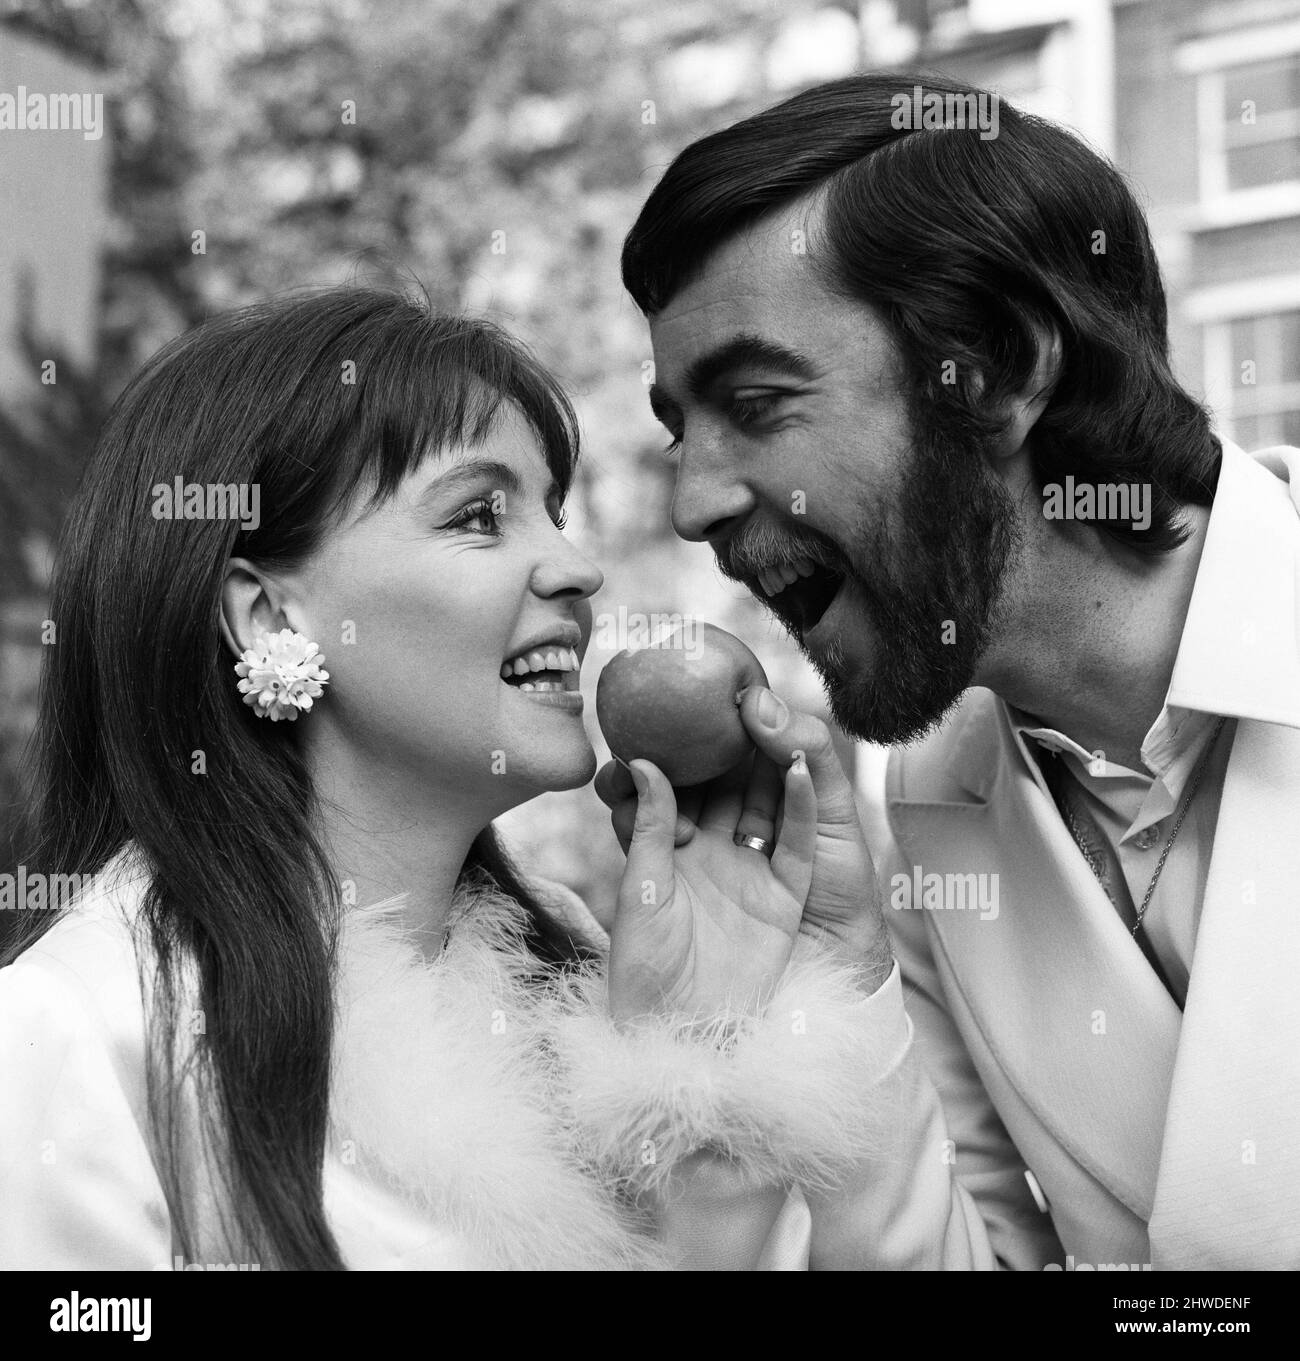 Actor John Alderton, who plays the school teacher in ITV series 'Please Sir' was today secretly married to actress Pauline Collins. They wed at Chelsea Registry Office. But tonight they arrive at the Apollo Theatre, as Pauline is the star of a play called 'The Happy Apple'. 22nd May 1970. Stock Photo